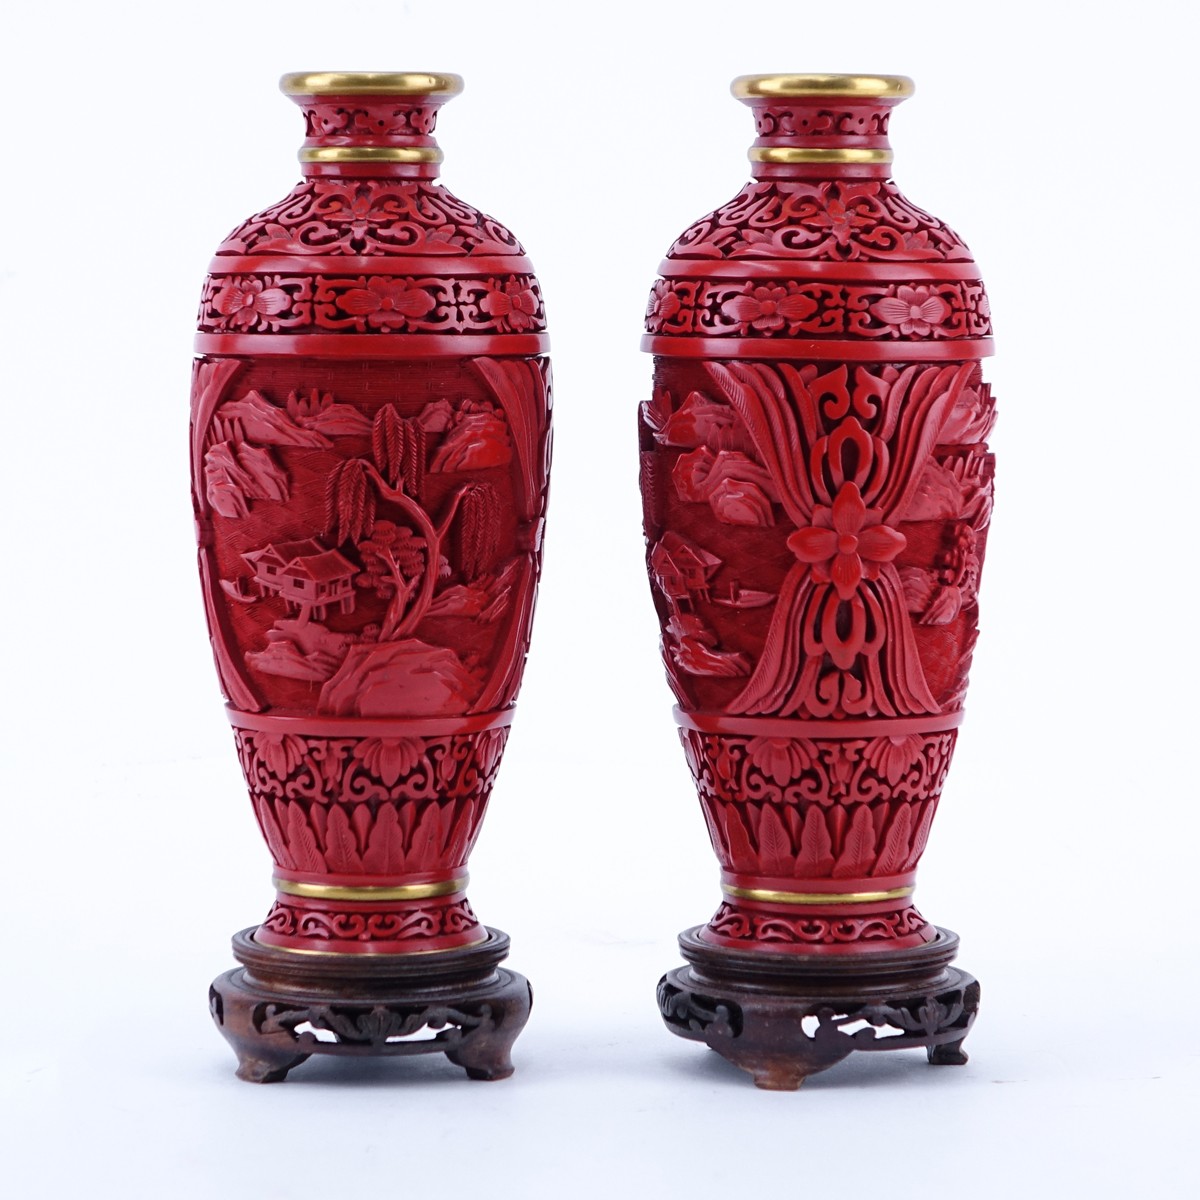 Two Vintage Cinnabar Vases With Stands. Intricately carved village scenes.